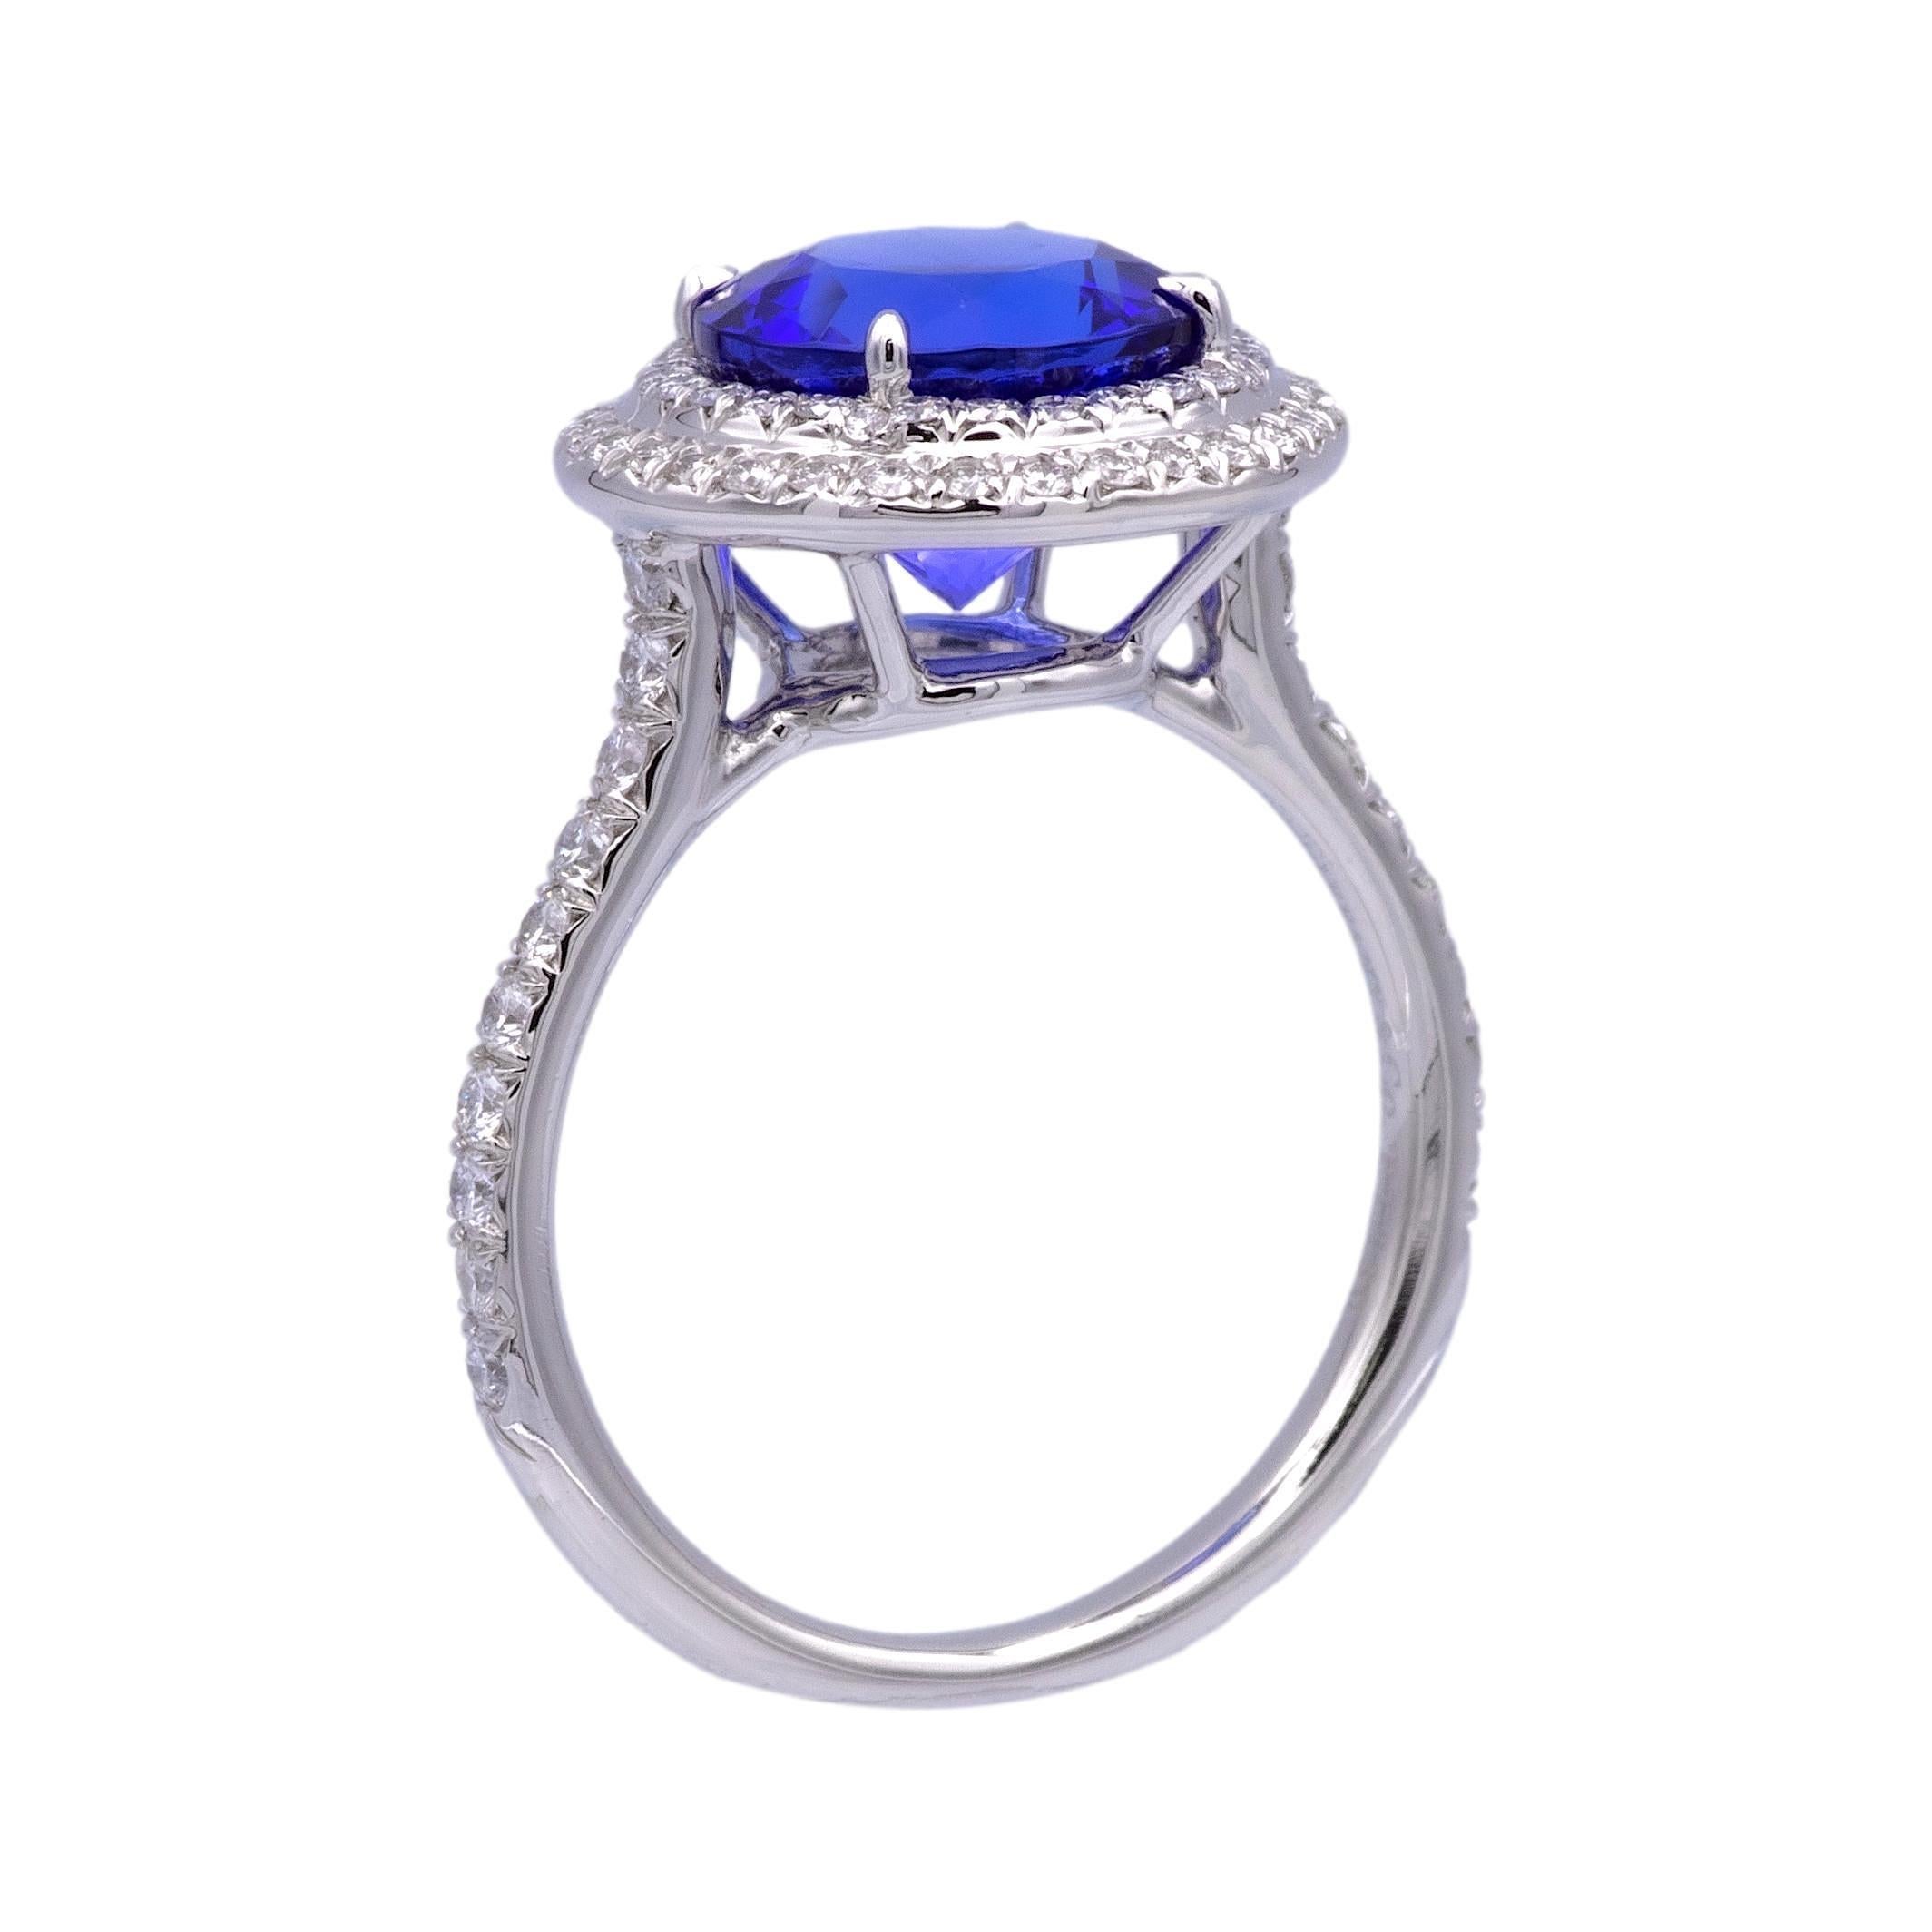 Tiffany & Co. Double Soleste diamond cocktail ring, a masterpiece of elegance and sophistication. Meticulously crafted in platinum, this exquisite piece showcases a mesmerizing violet blue tanzanite round-shaped center, weighing 3.15 carats